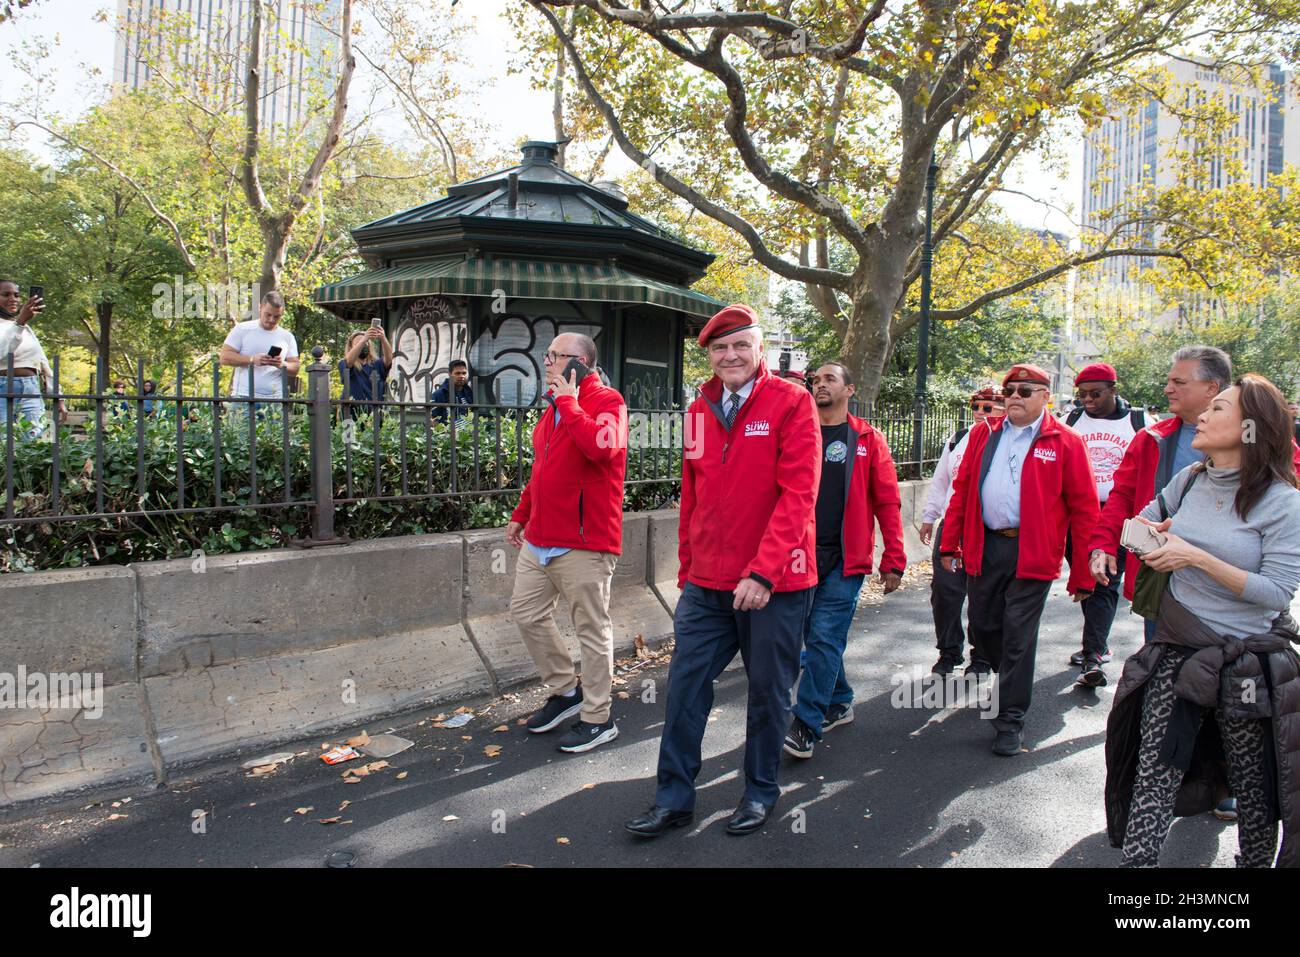 Curtis Sliwa is among the crowd at medical choice, anti-vaccine mandate rally held by New York City Workers, October 25, 2021 Stock Photo